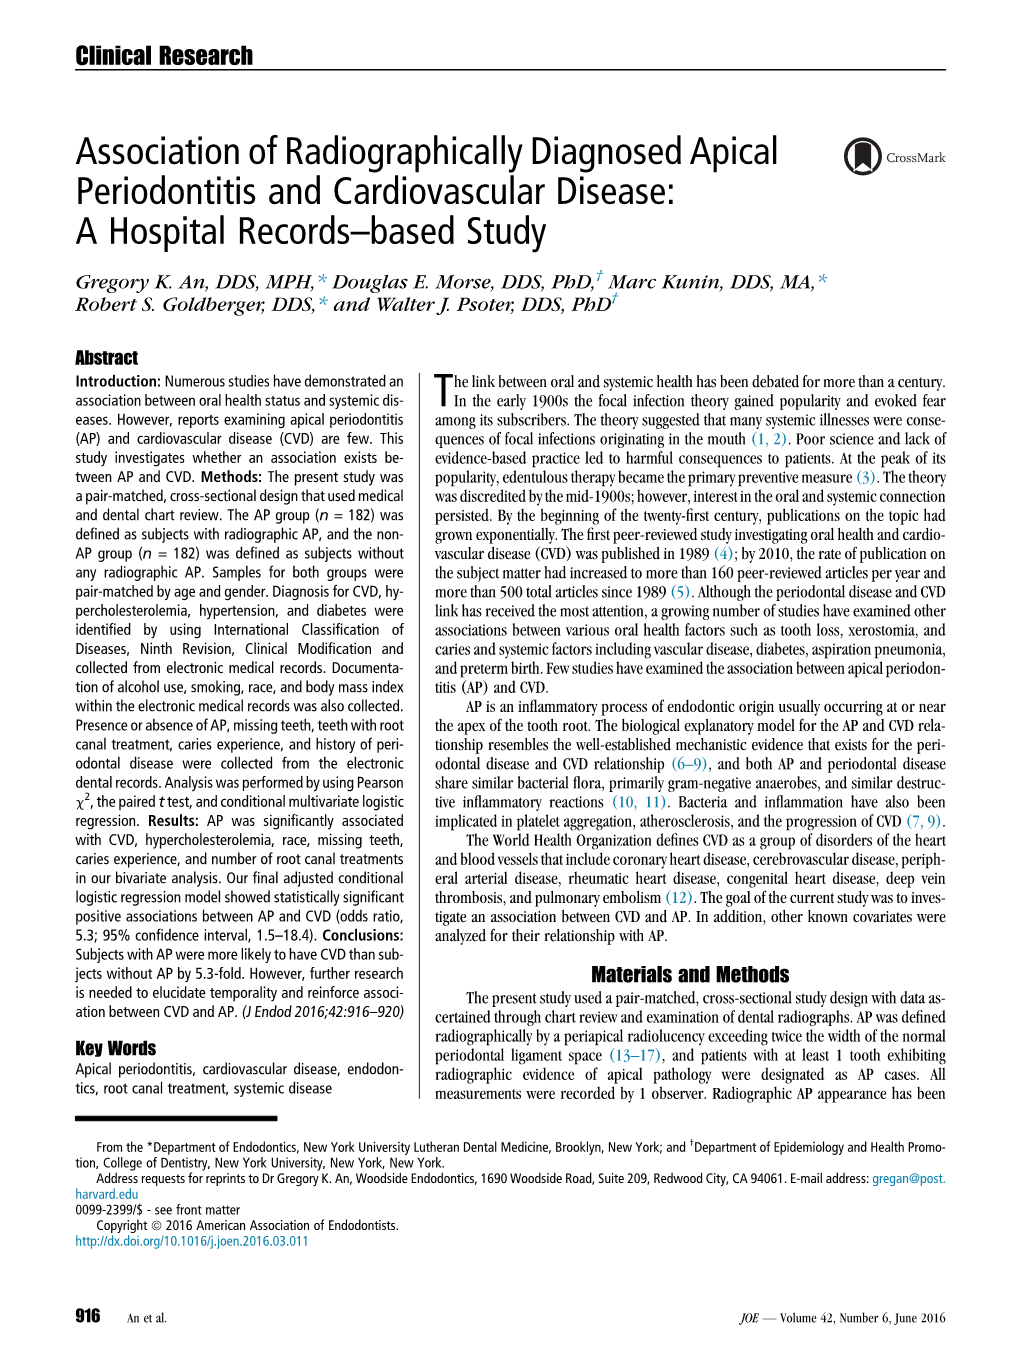 Association of Radiographically Diagnosed Apical Periodontitis and Cardiovascular Disease: a Hospital Records–Based Study Gregory K